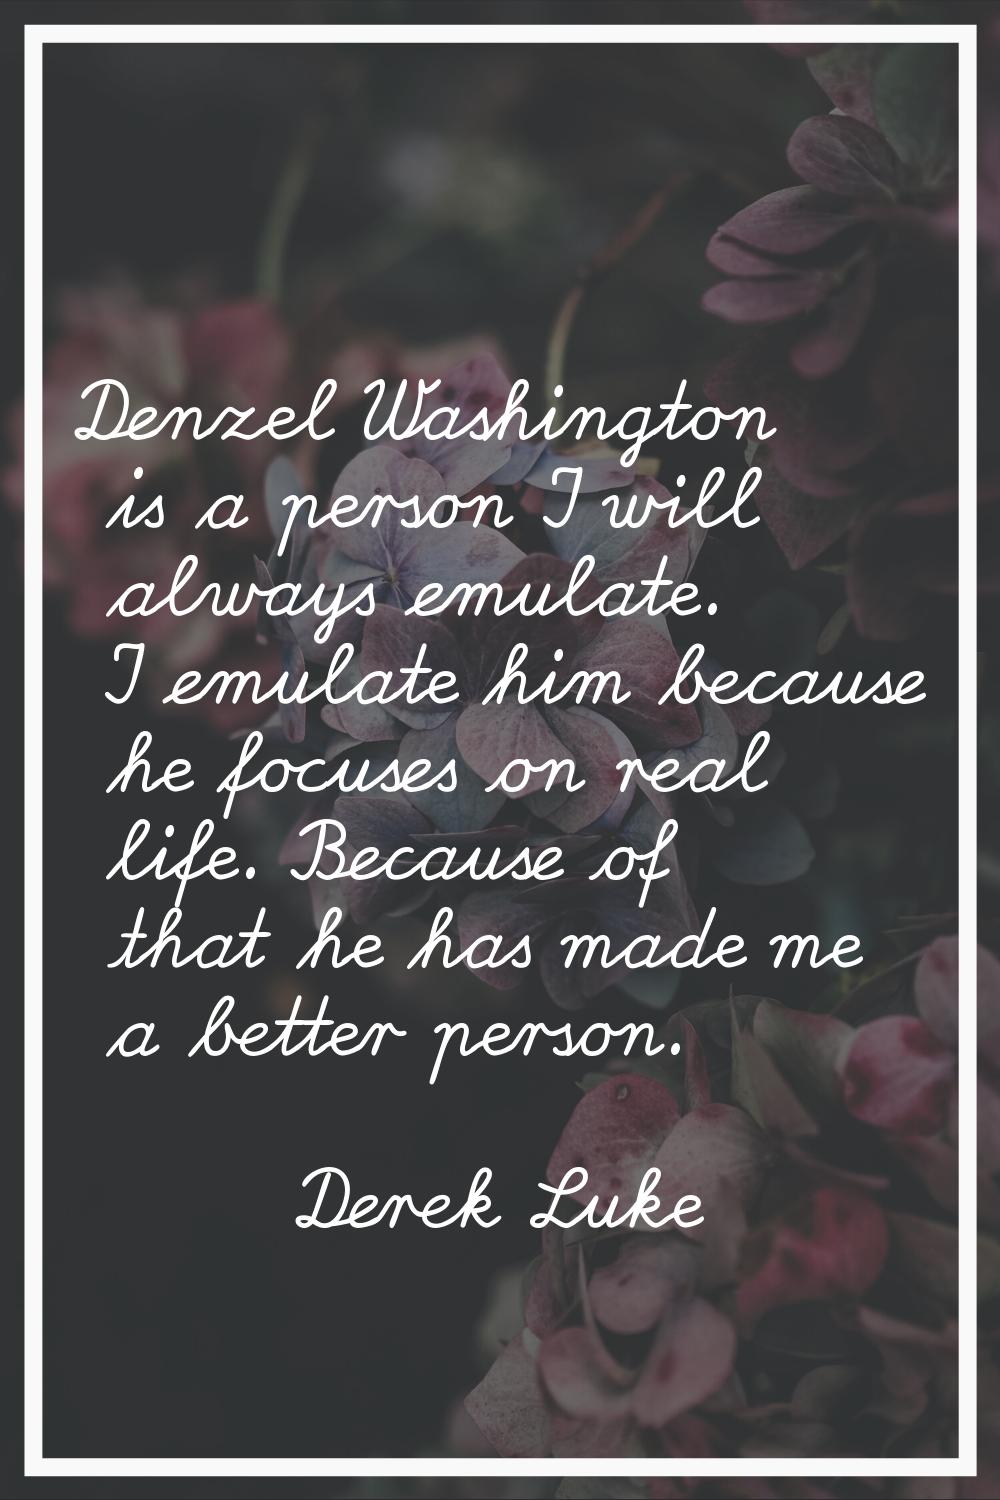 Denzel Washington is a person I will always emulate. I emulate him because he focuses on real life.